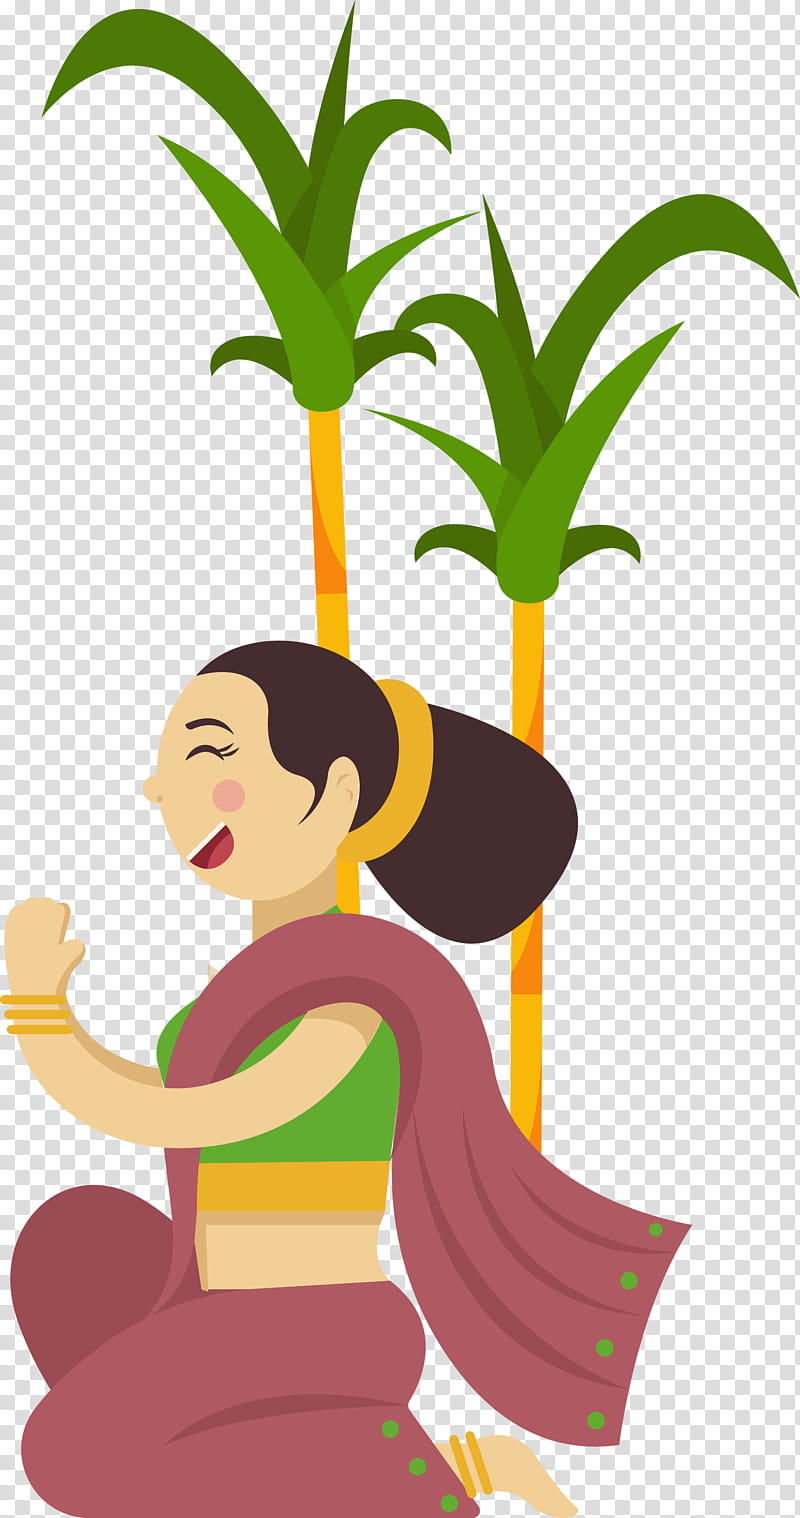 pongal, Character, Cartoon, Joint, Sitting, Plants, Tree, Text transparent background PNG clipart